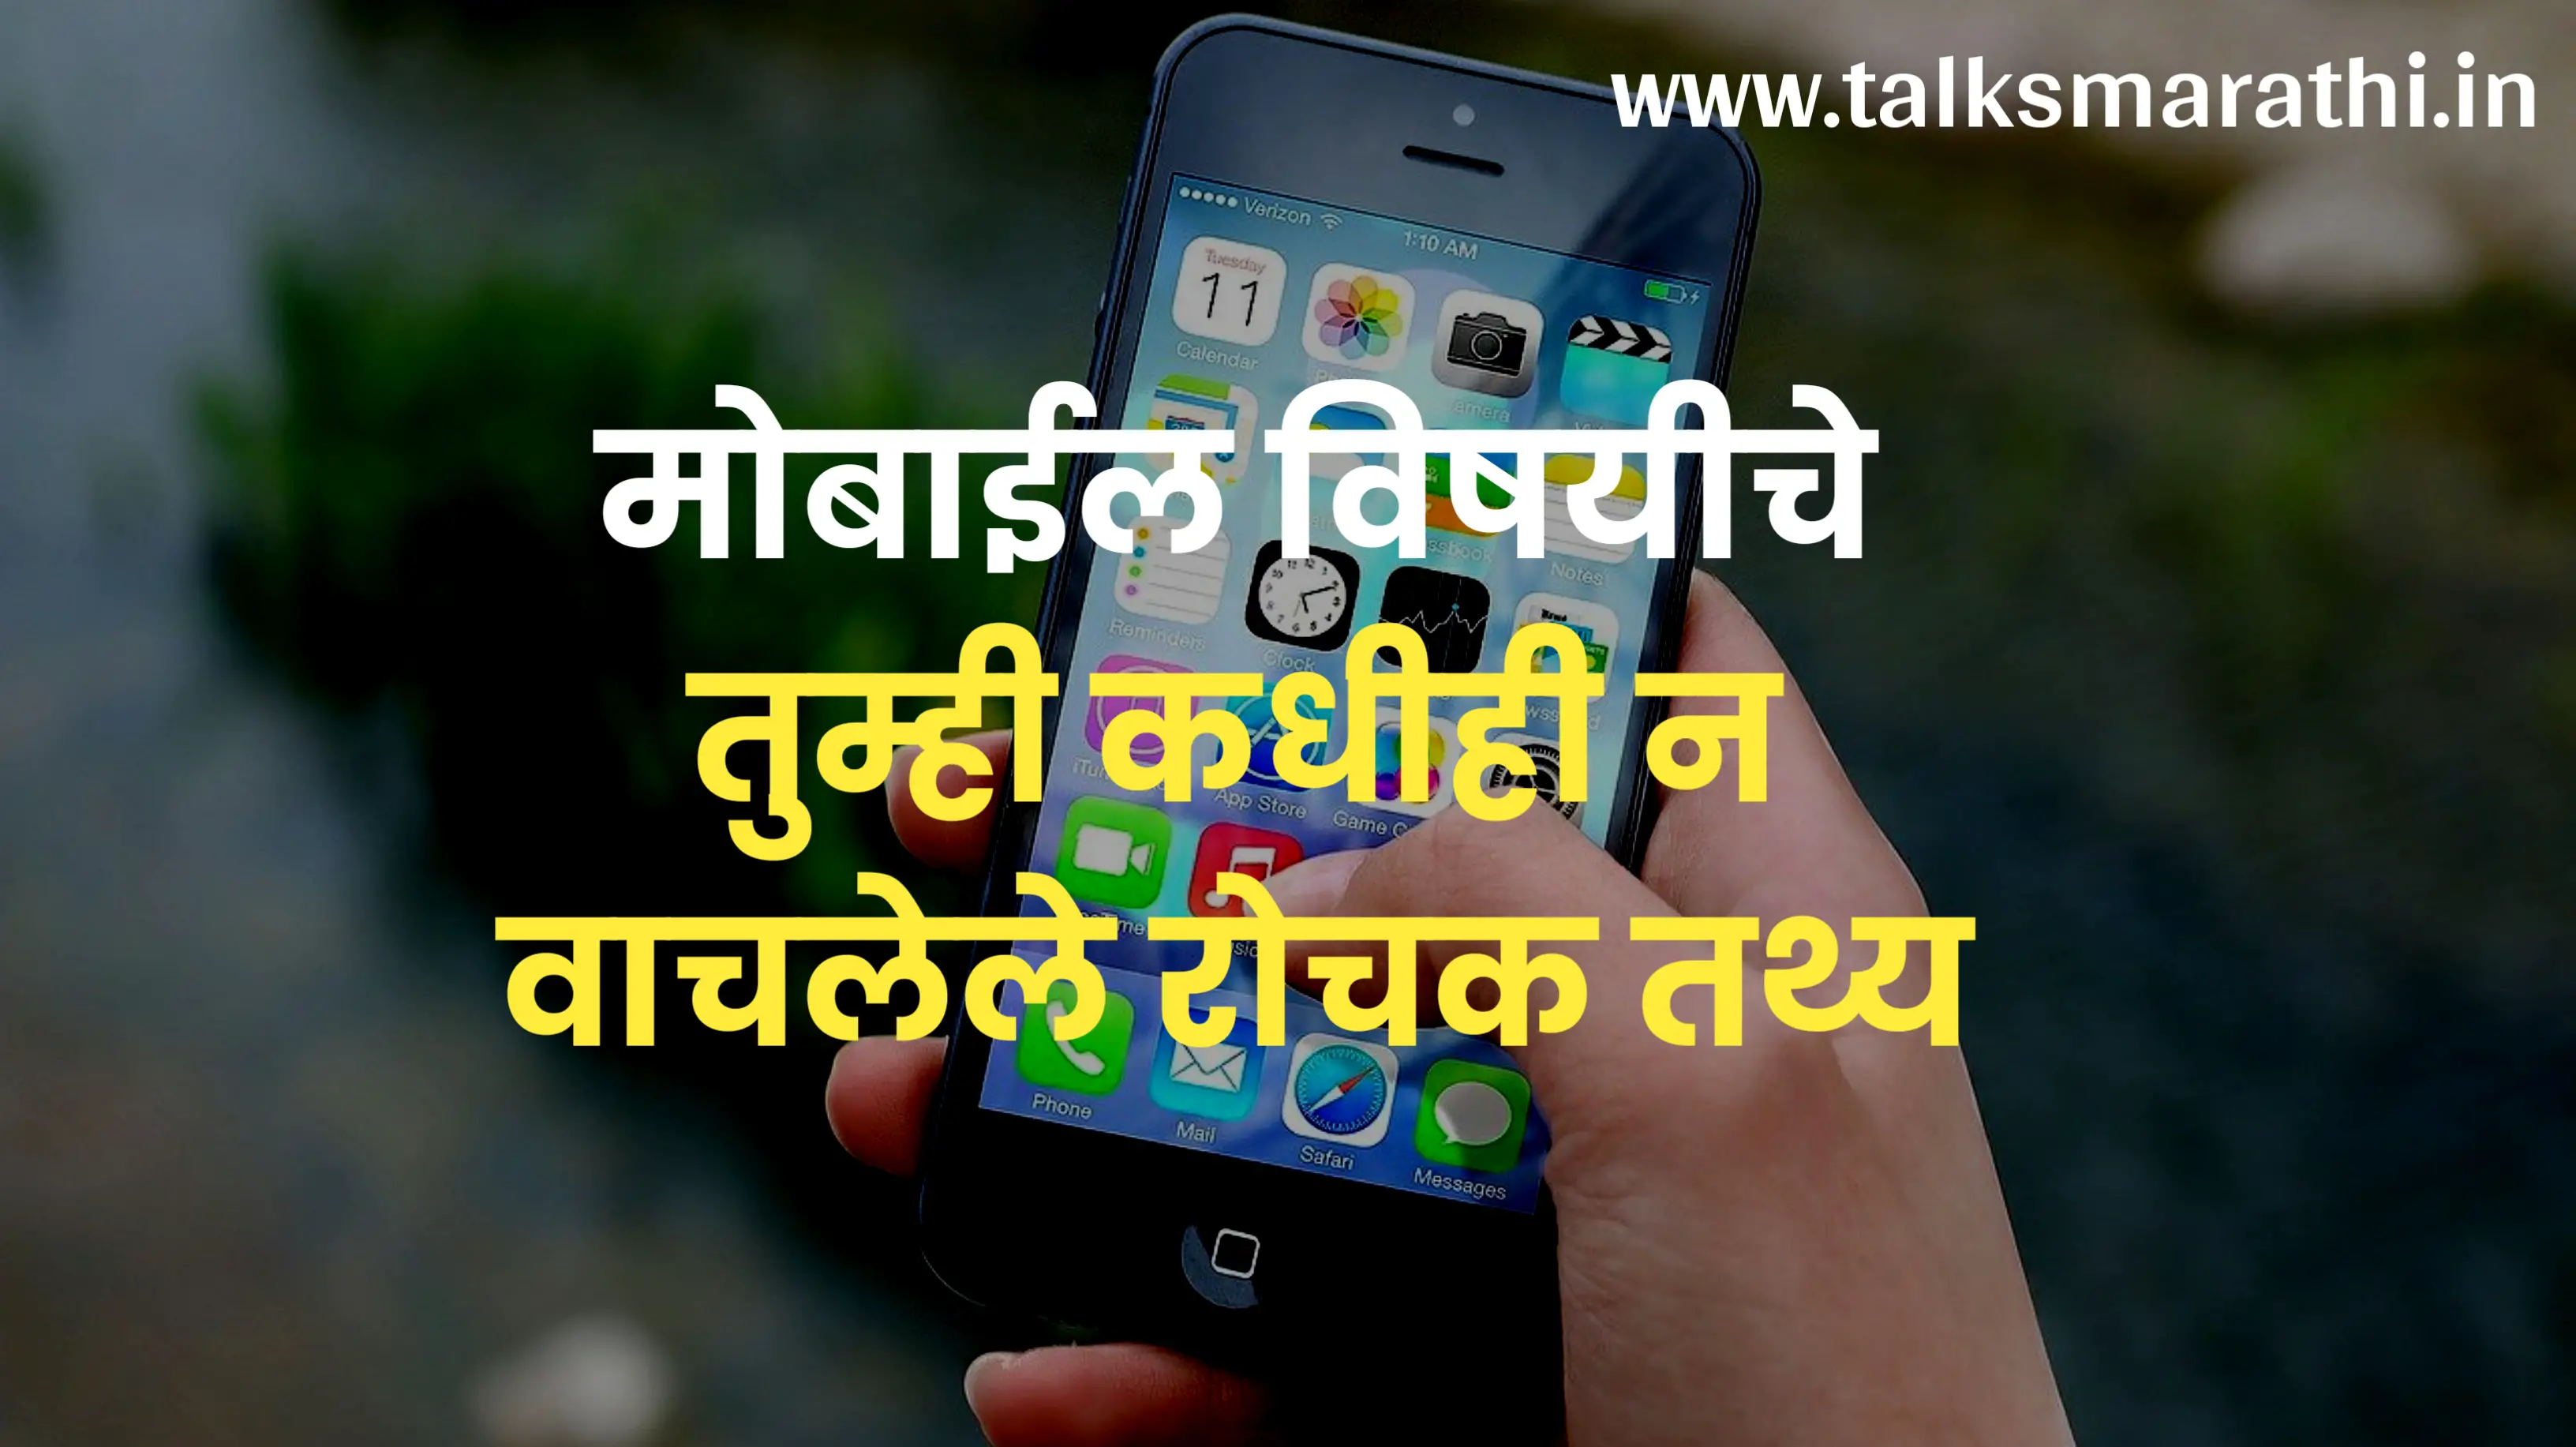 35 Intresting facts about mobile in Marathi